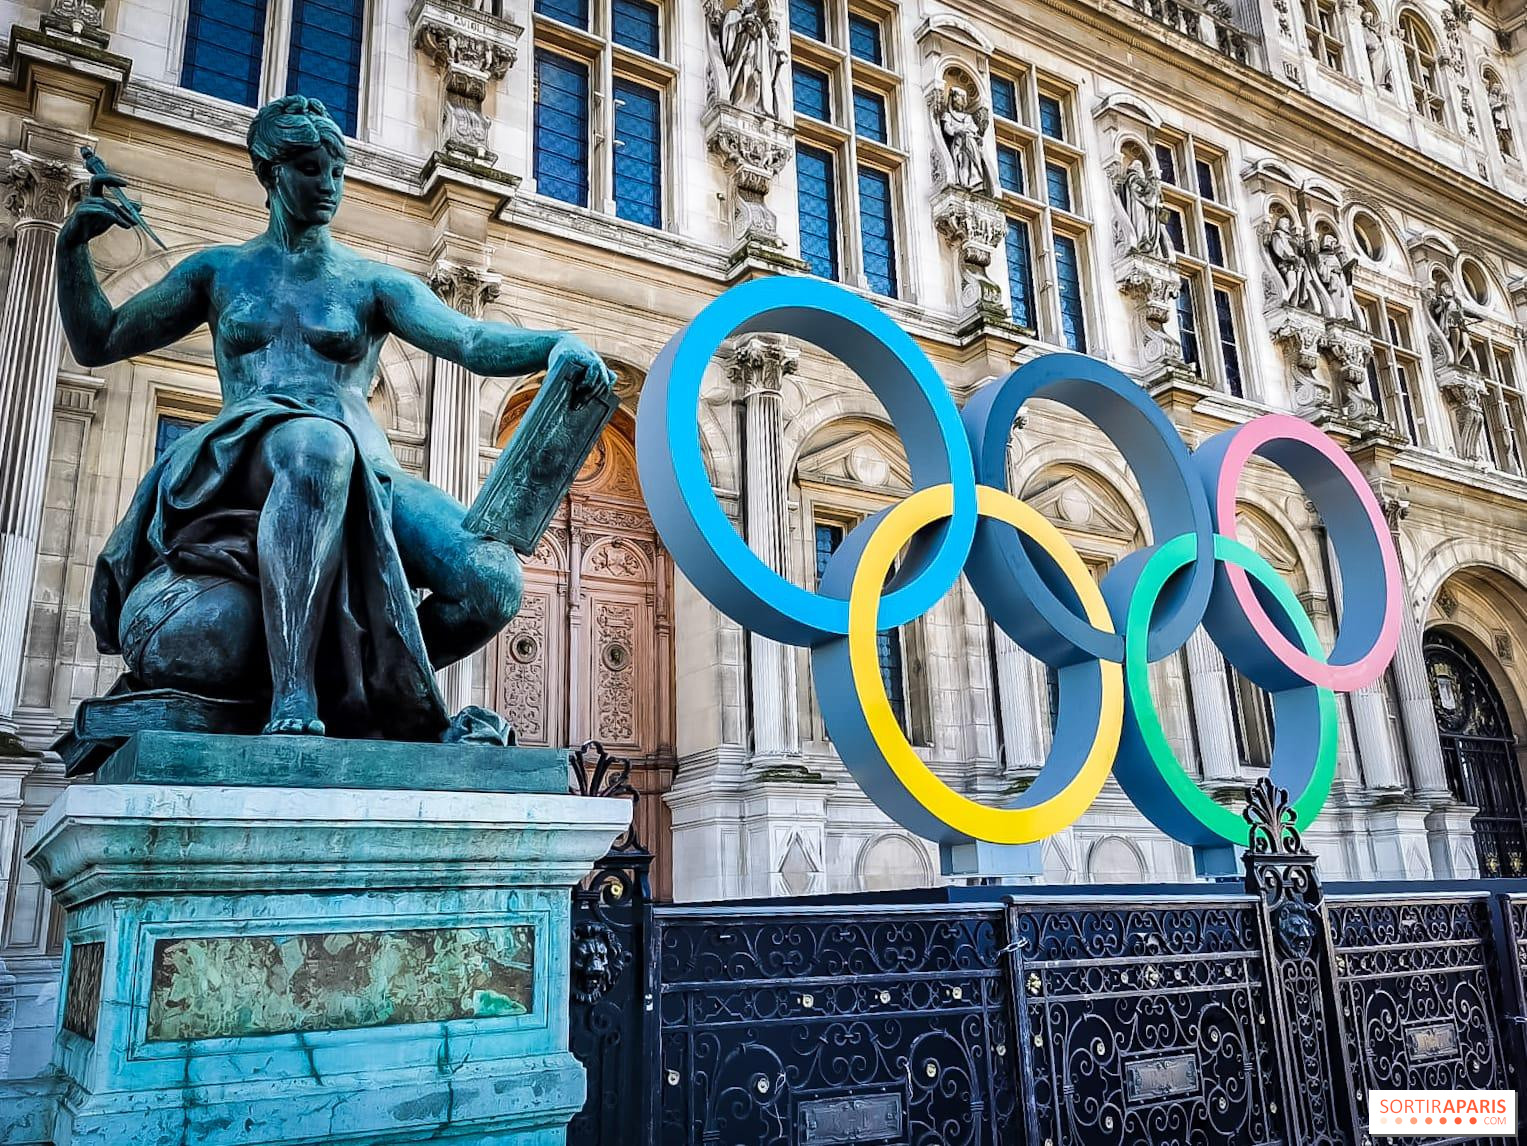 Paris 2024: Escape Games, Action Games, Adventure Games to Discover for Olympic Games